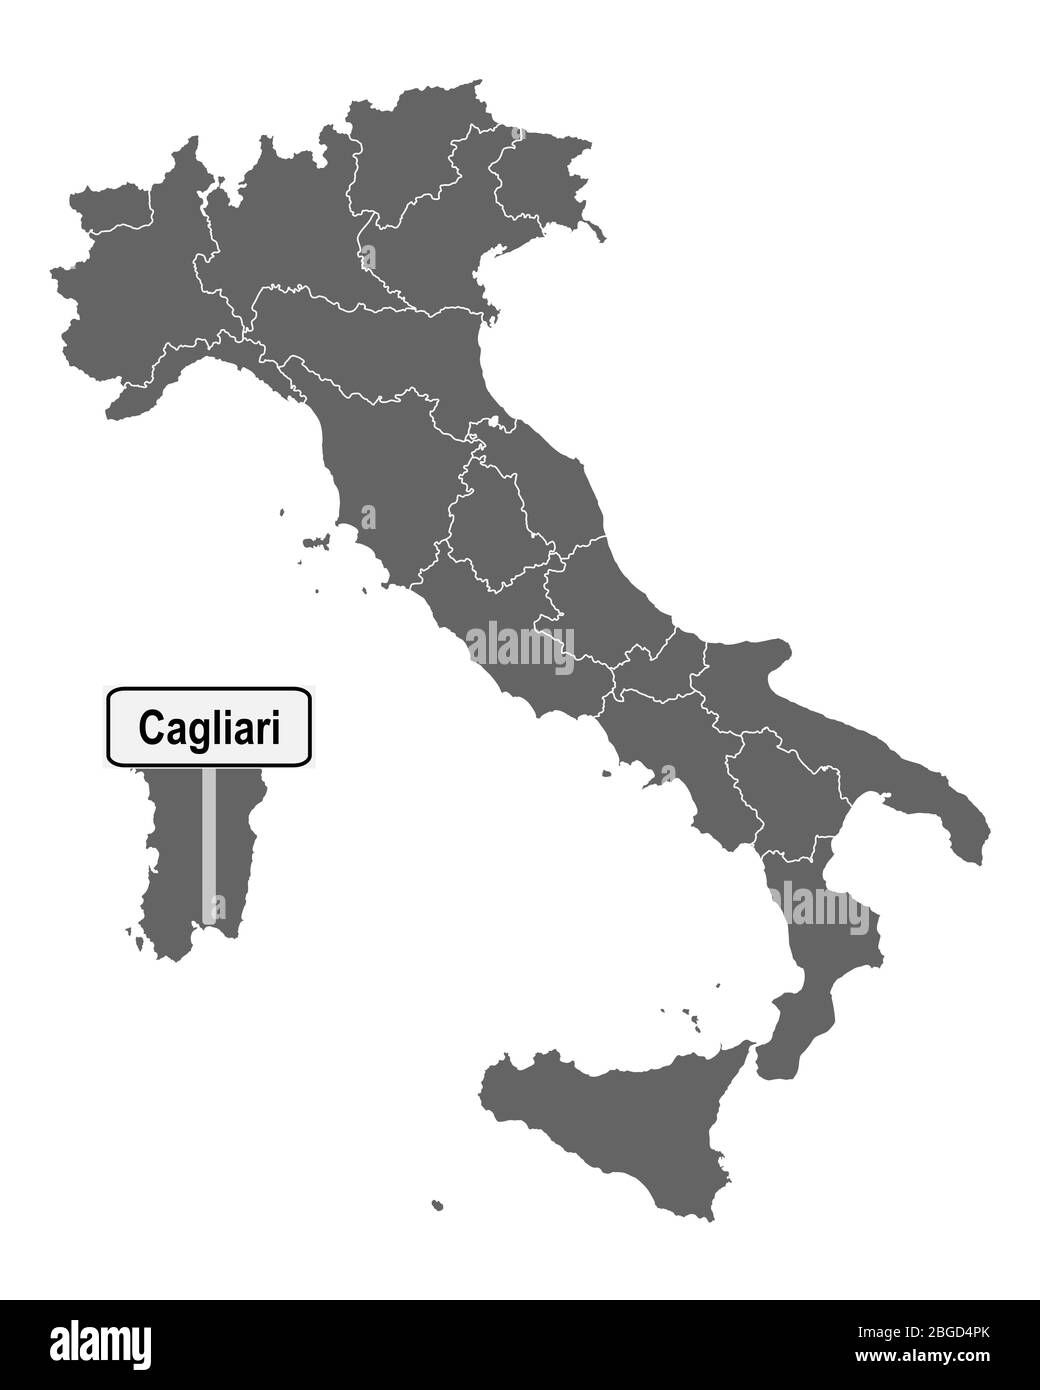 Map of Italy with road sign of Cagliari Stock Photo